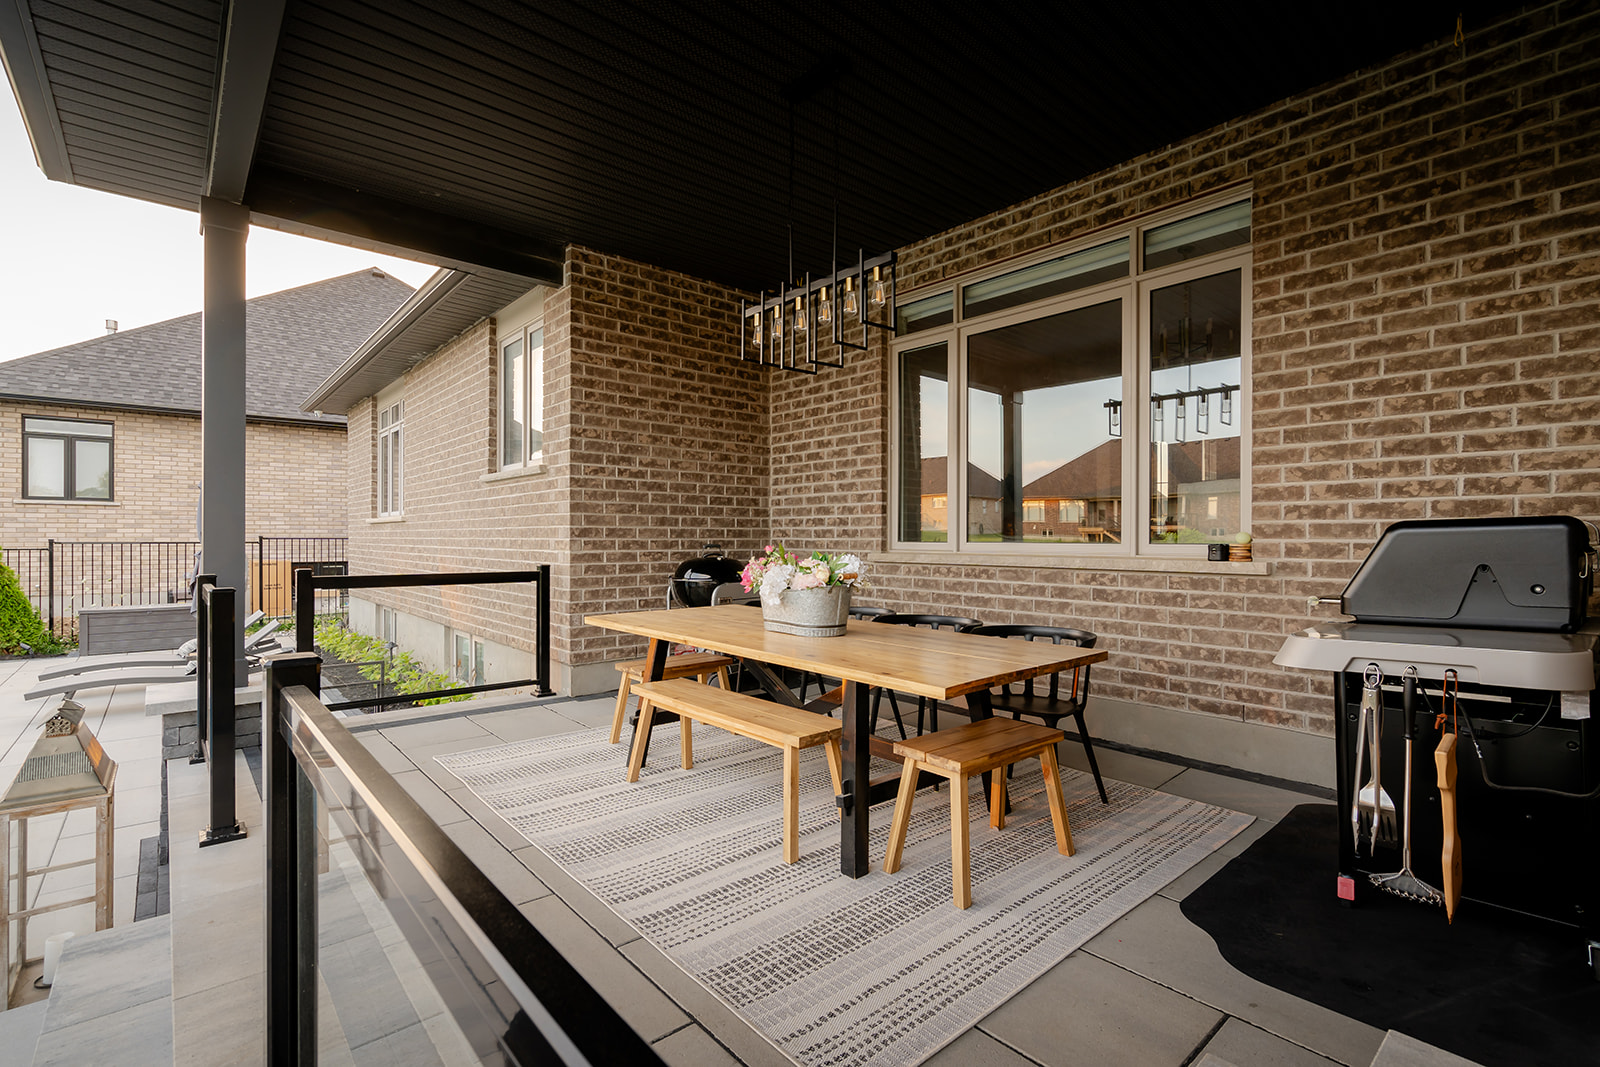 An outdoor seating area with a barbeque on the side.